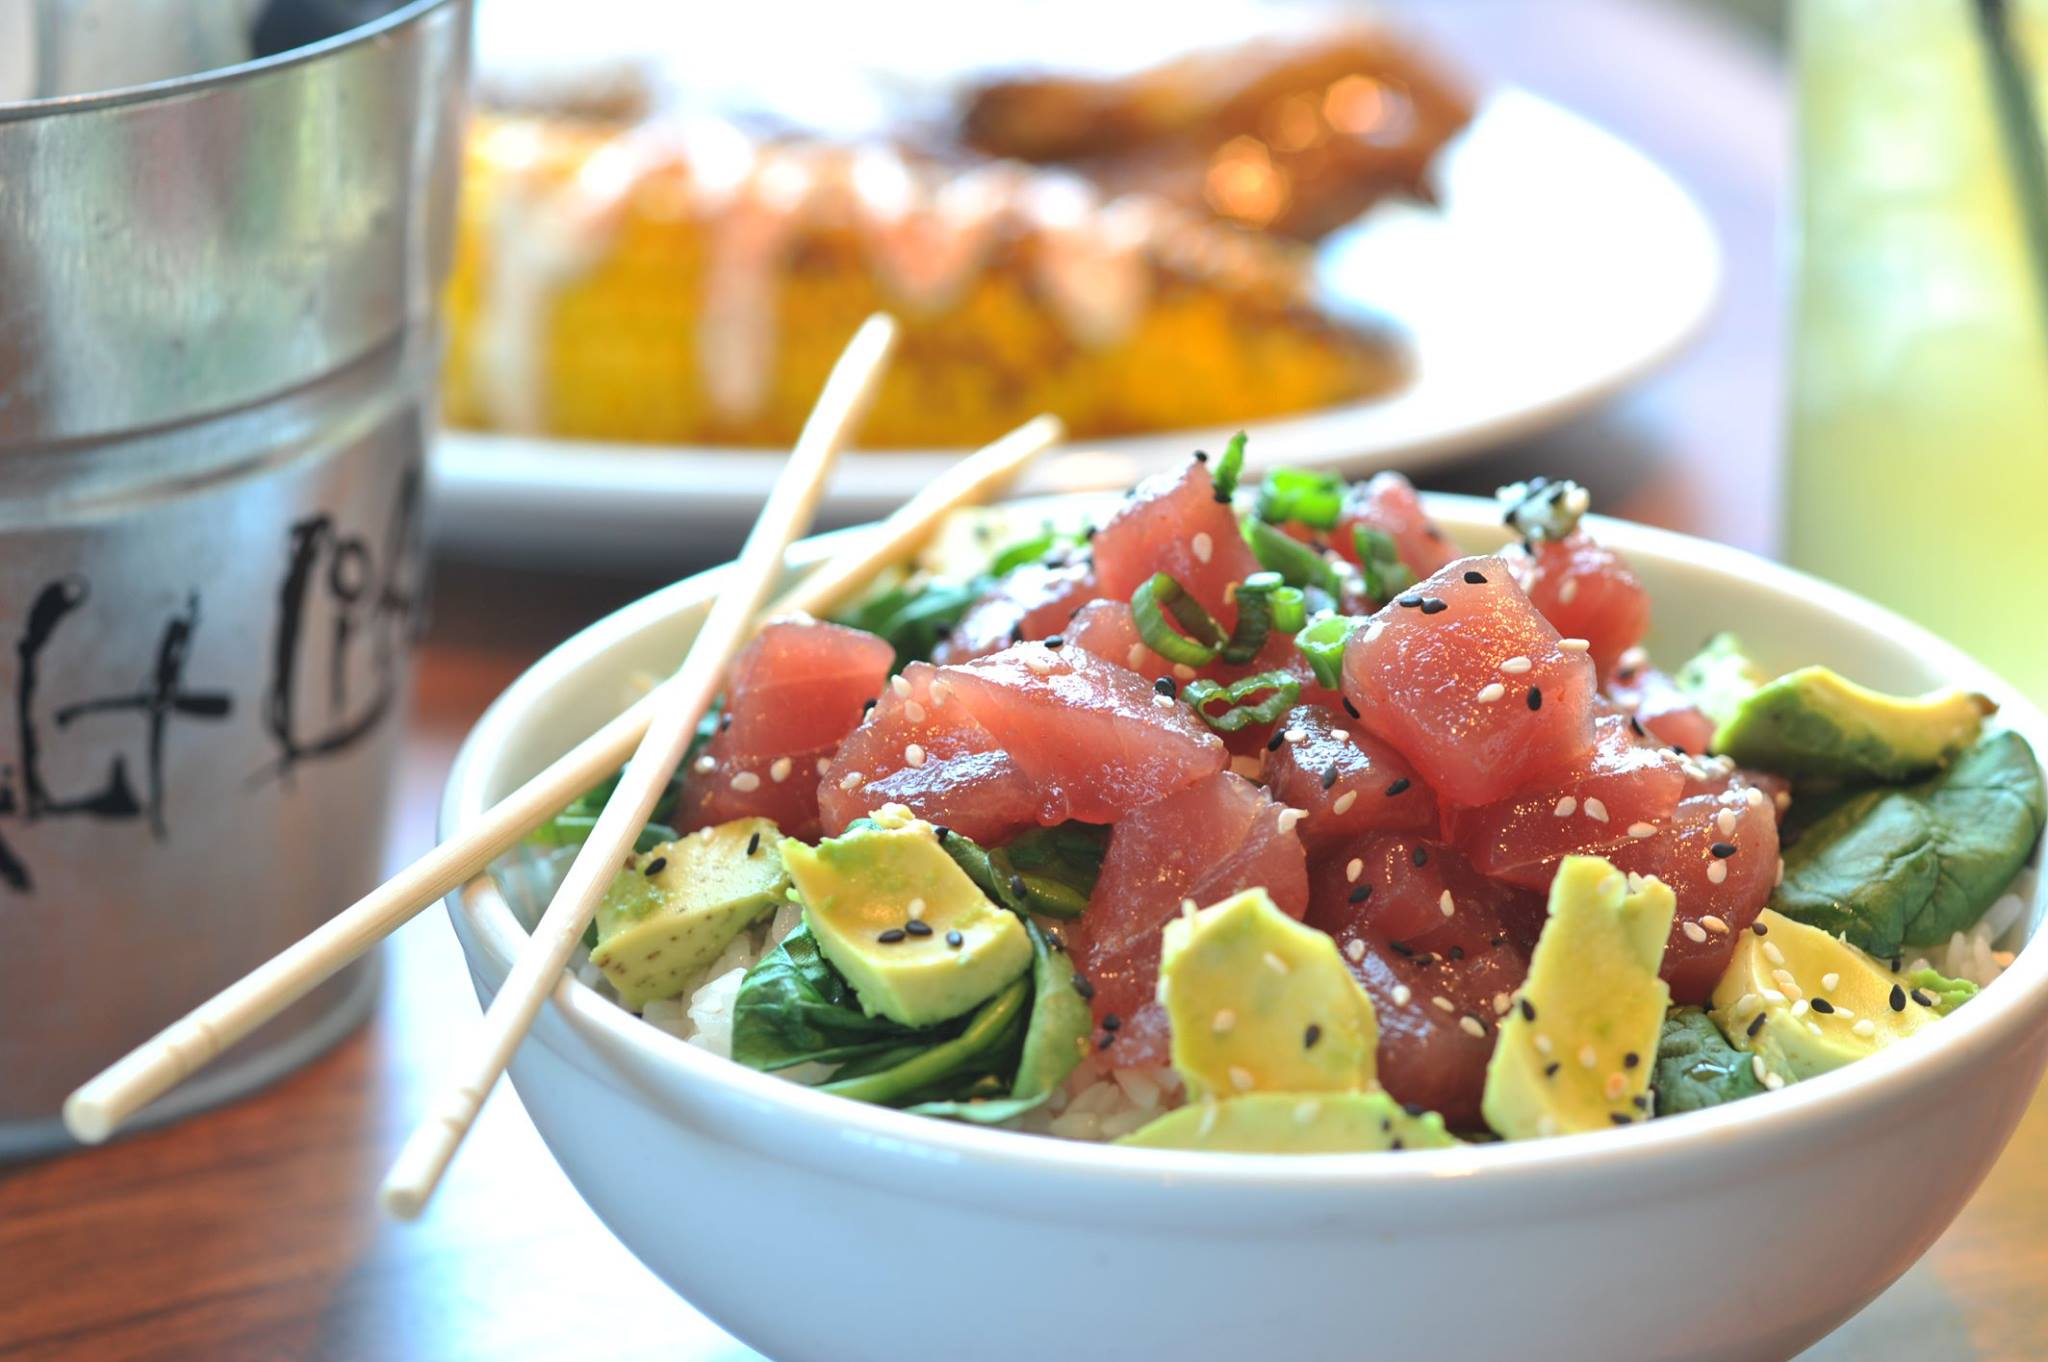 News from The Pierce - Where to get Poke in San Jose